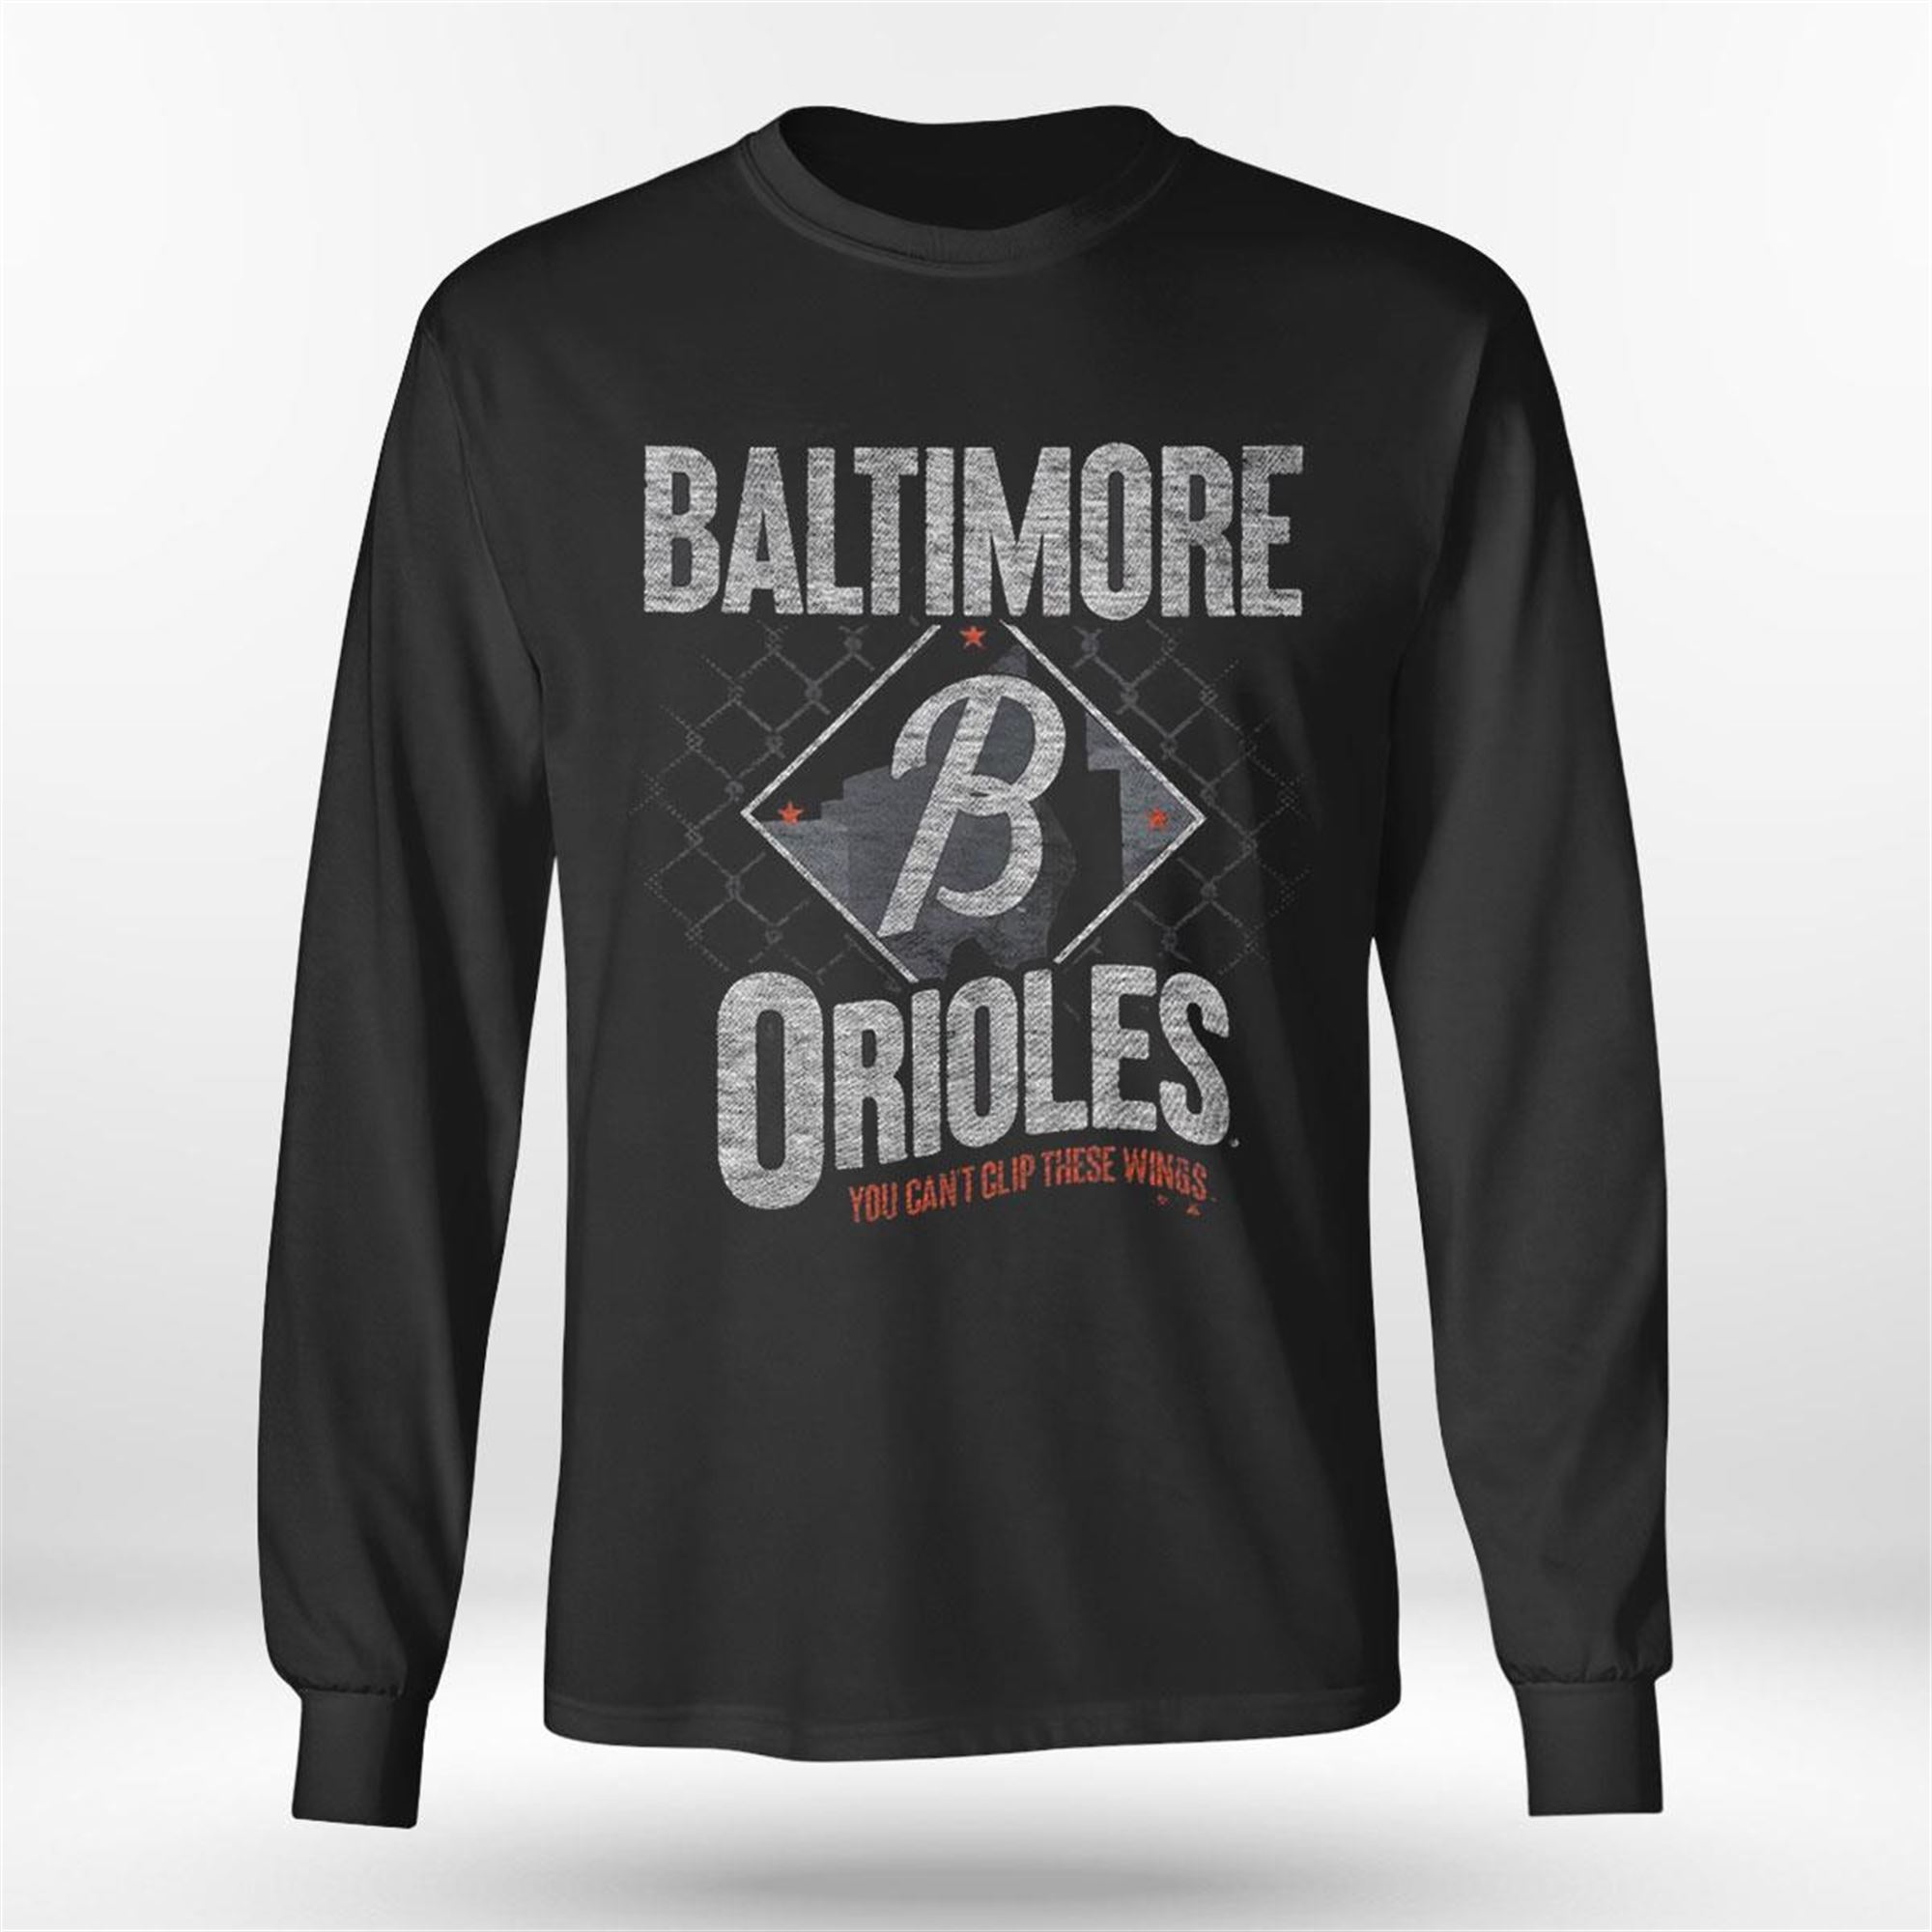 Buy a Womens Touch Baltimore Orioles Sweatshirt Online